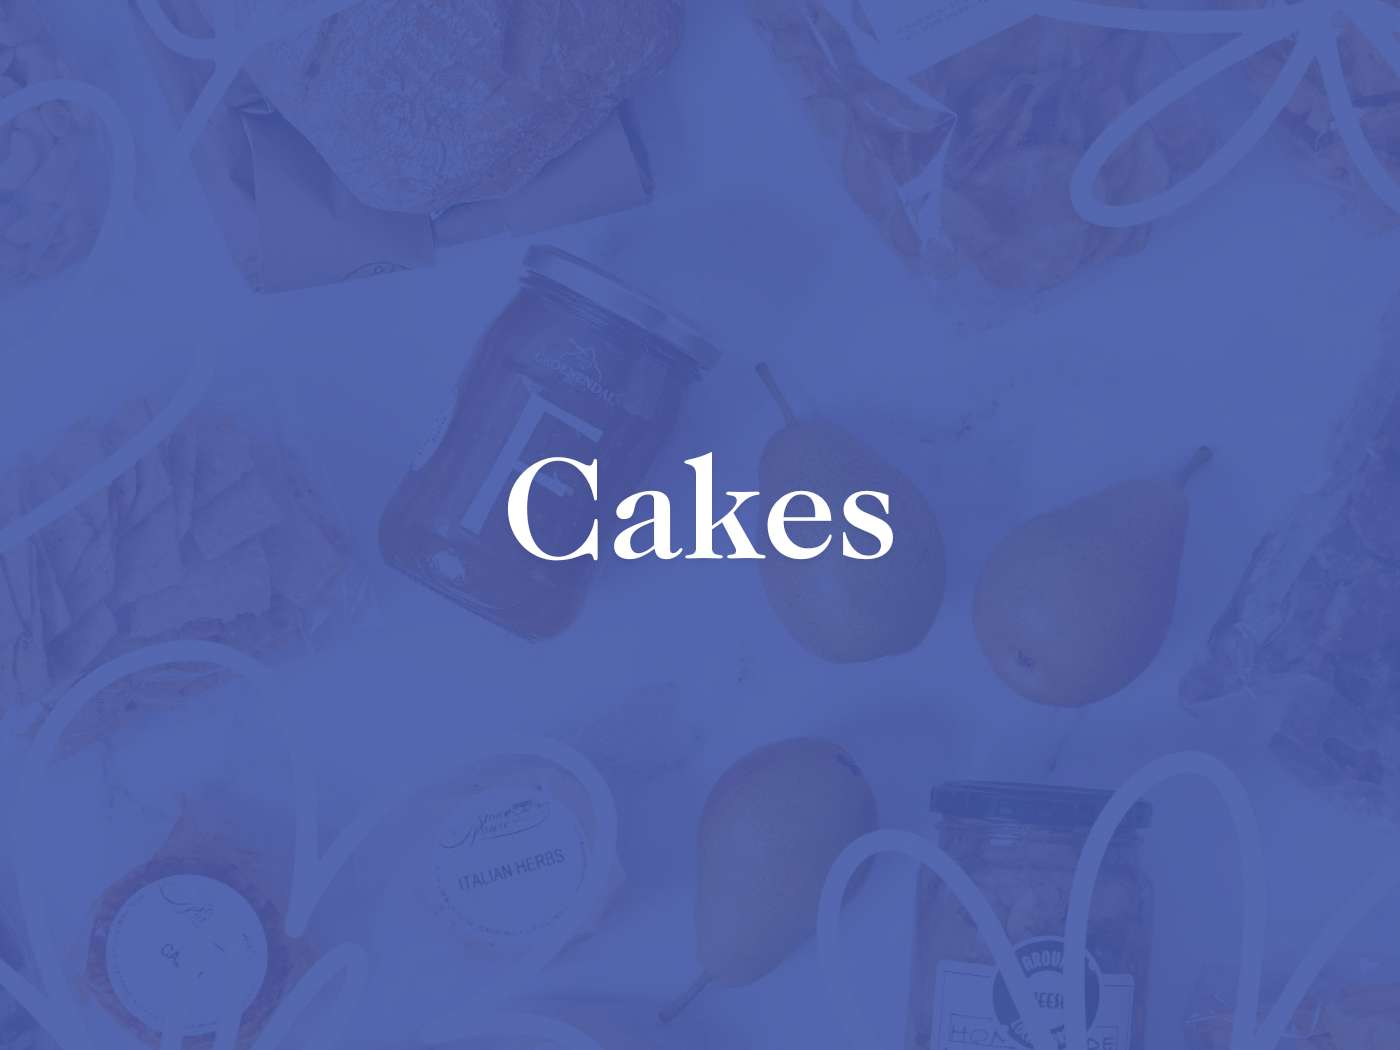 Subtle blue collage background with a central overlay text 'Cakes', suggesting a theme of bakery delights complemented by the range at Fabulous Flowers and Gifts.